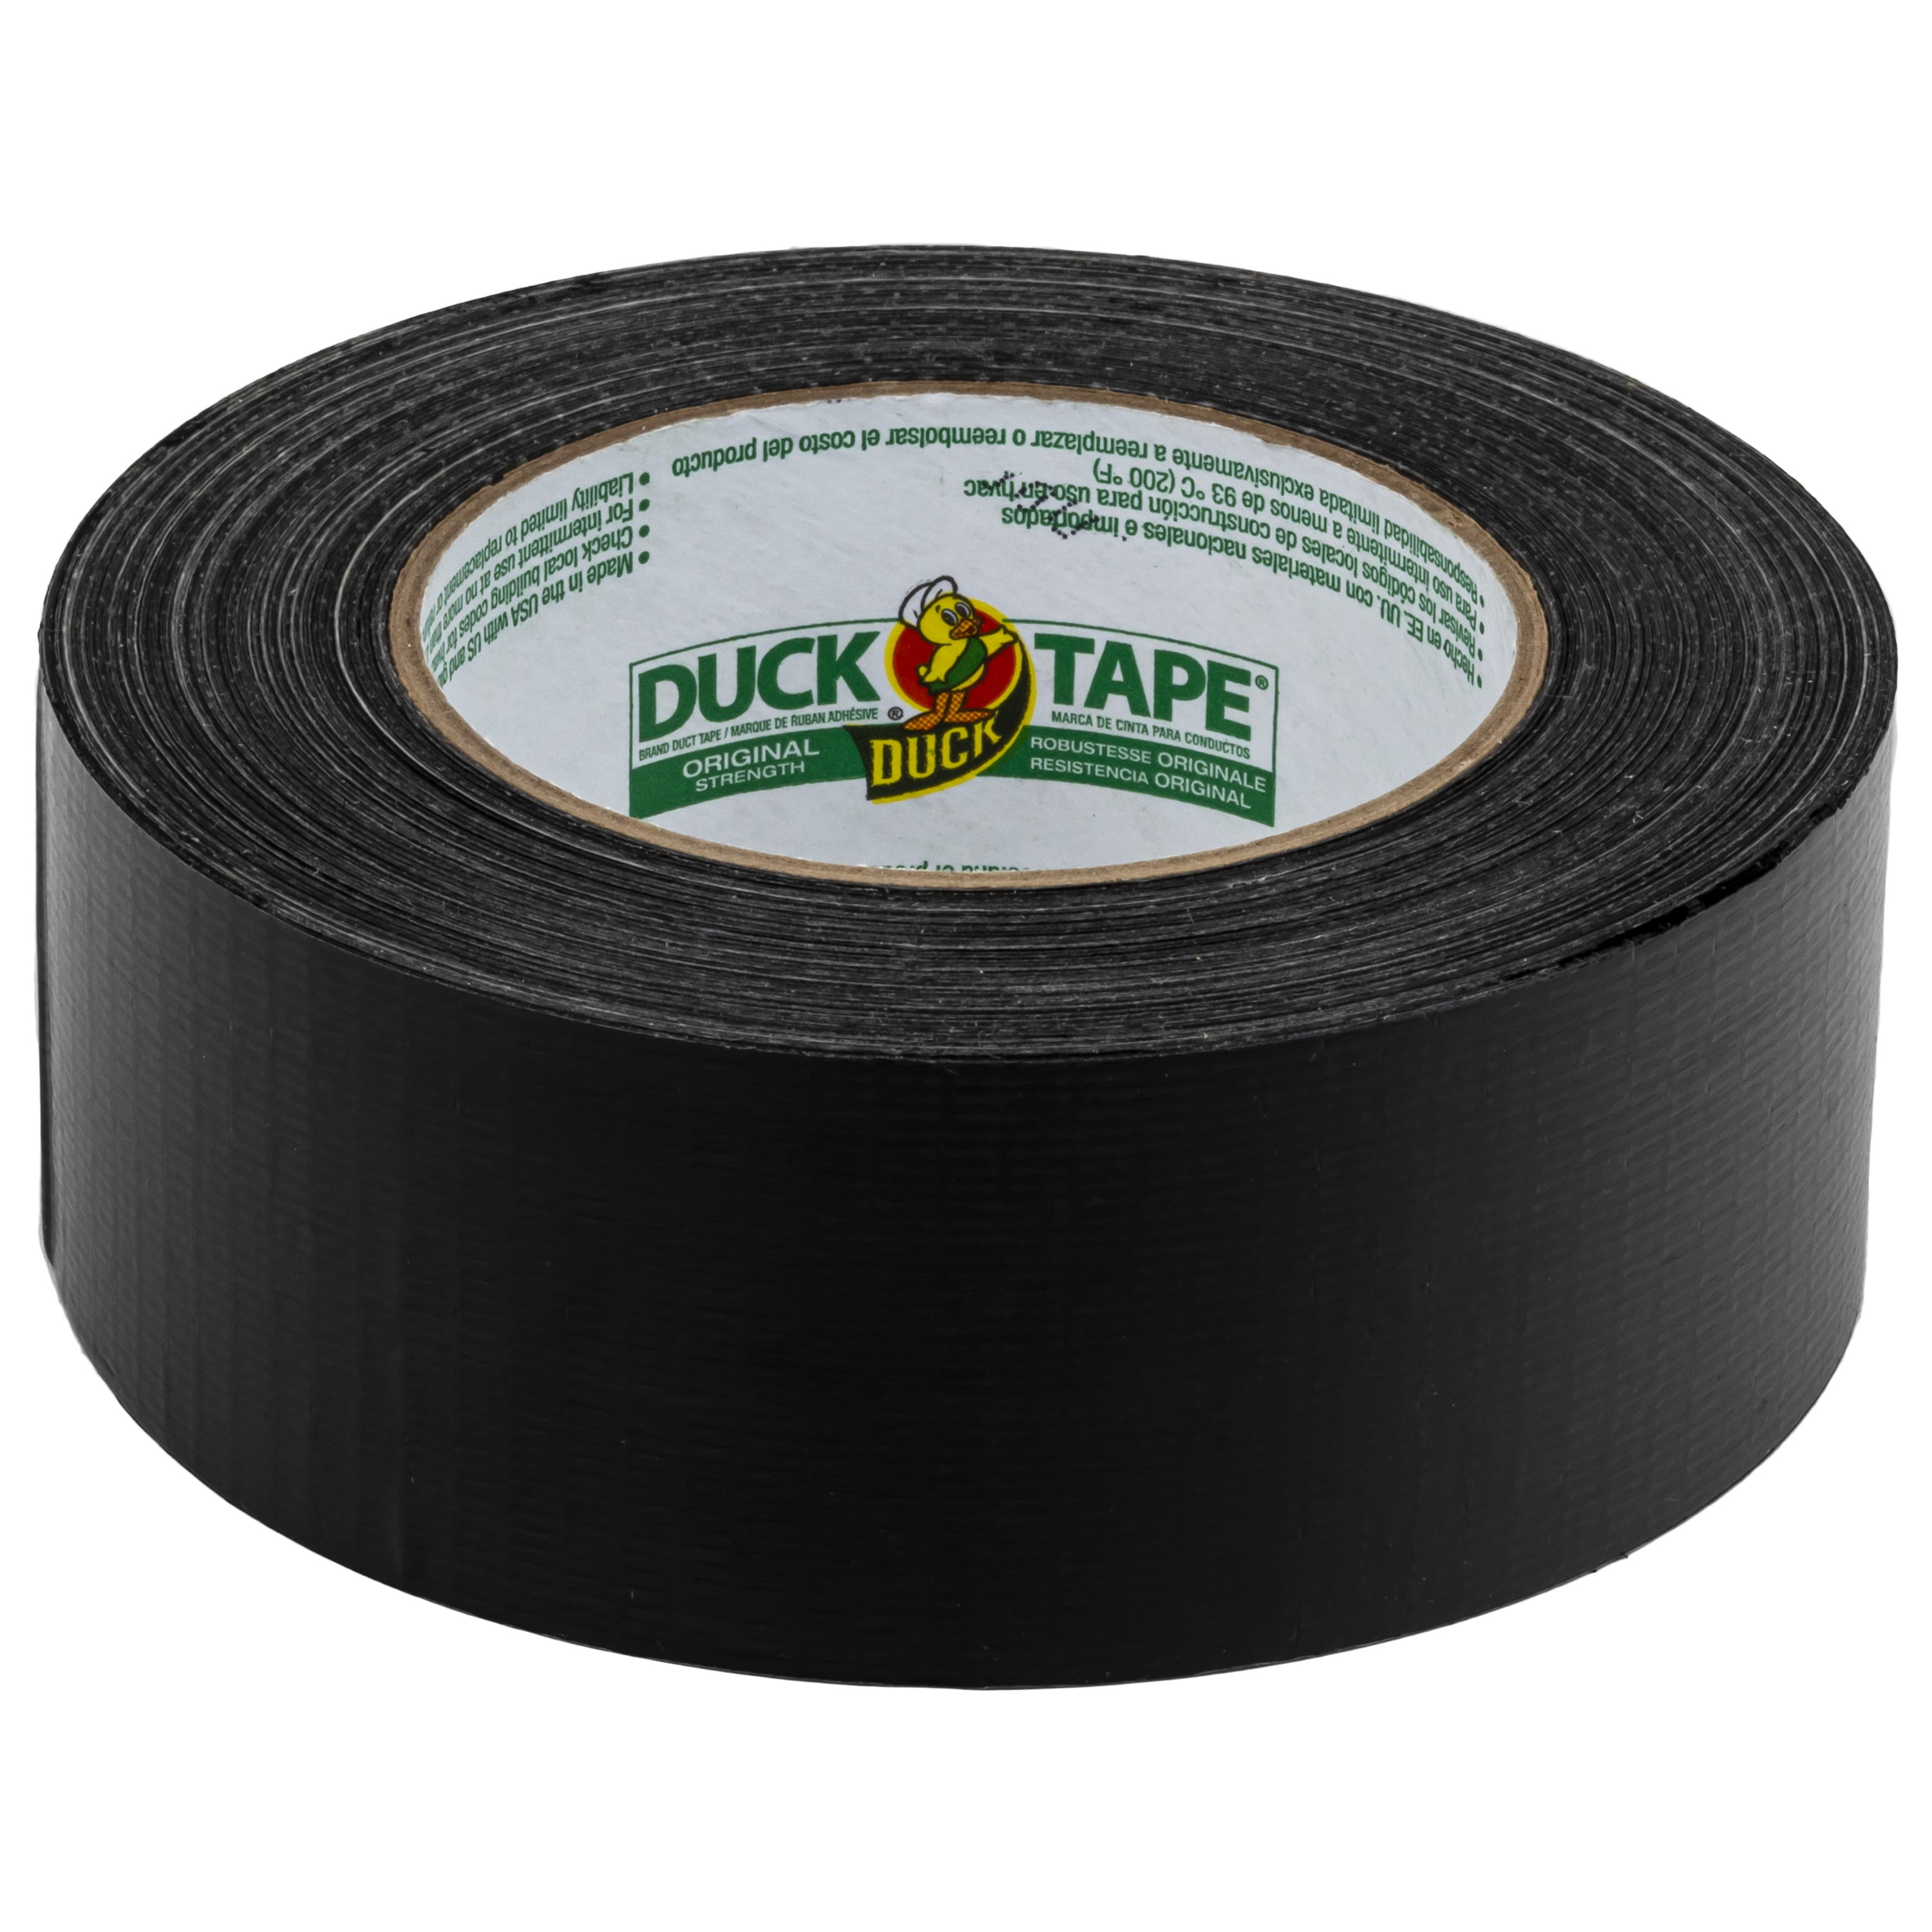 The Original Duck Tape Brand Duct Tape, Black, 1.88 in. x 45 yd. 